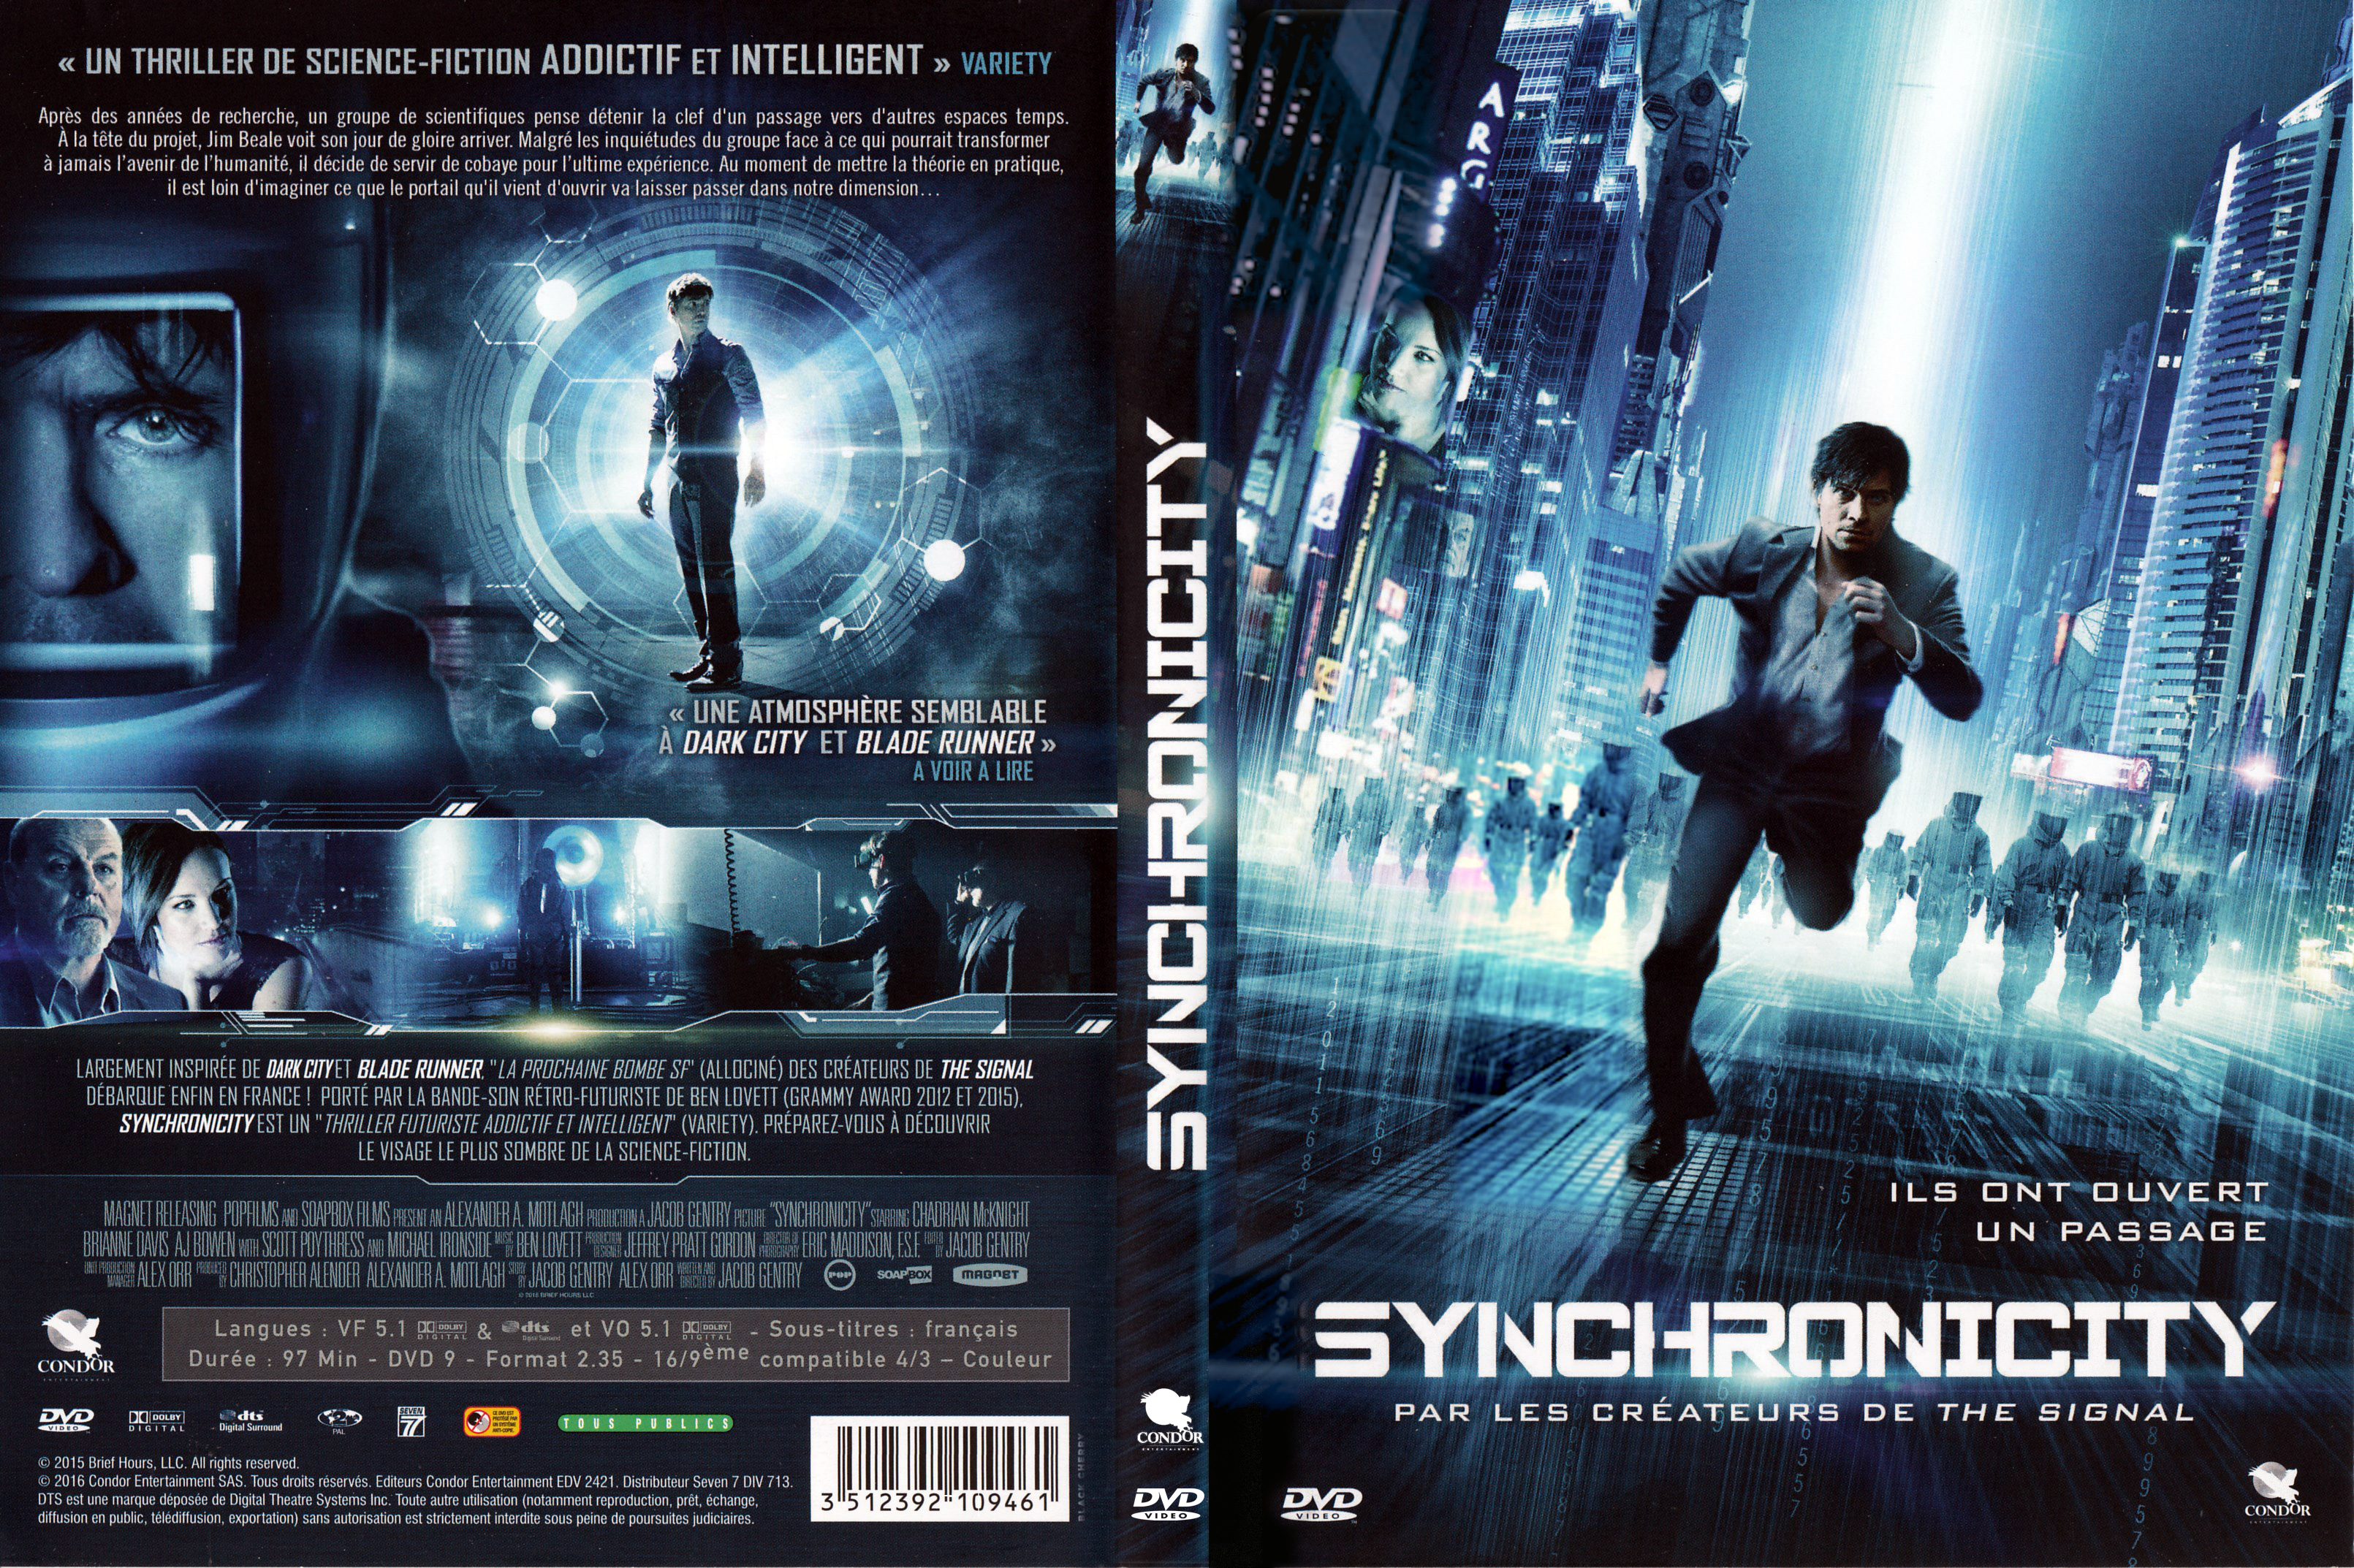 Jaquette DVD Synchronicity